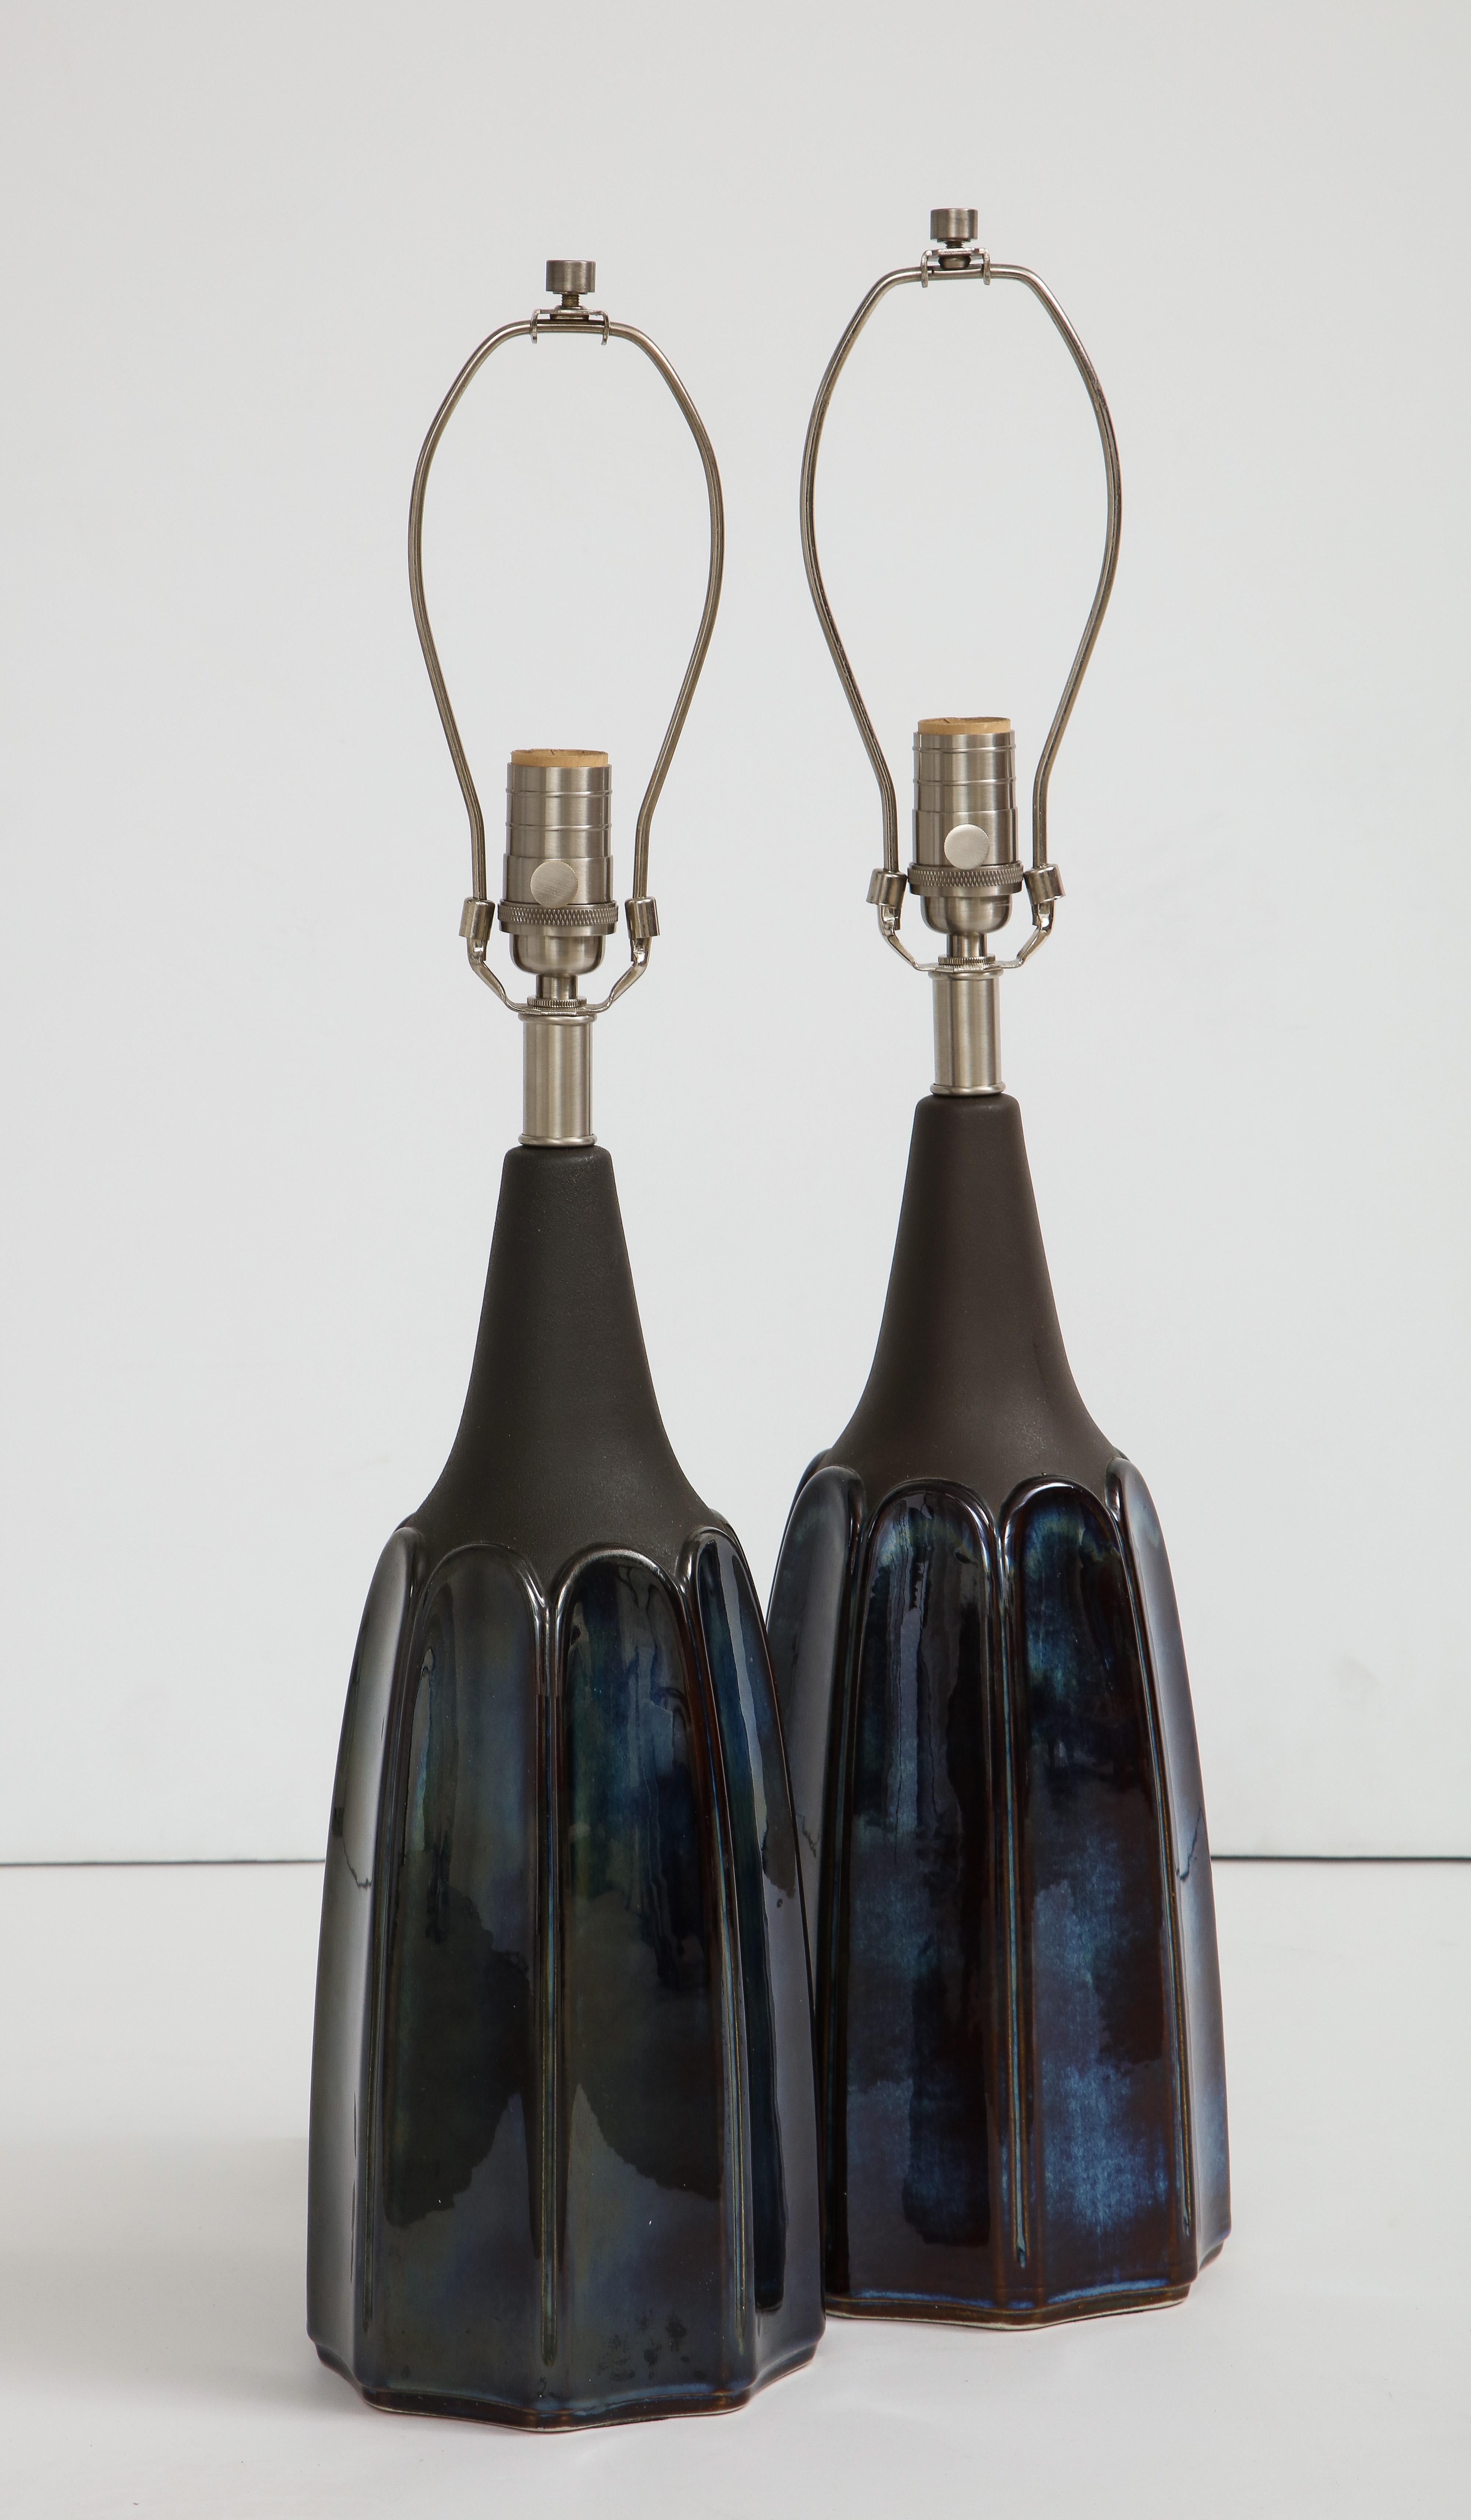 Pair of Scandinavian Modern porcelain lamps featuring a mottled blue body and matte gunmetal glazed necks and brushed nickel hardware. Rewired for use in the USA, 100W max bulbs.